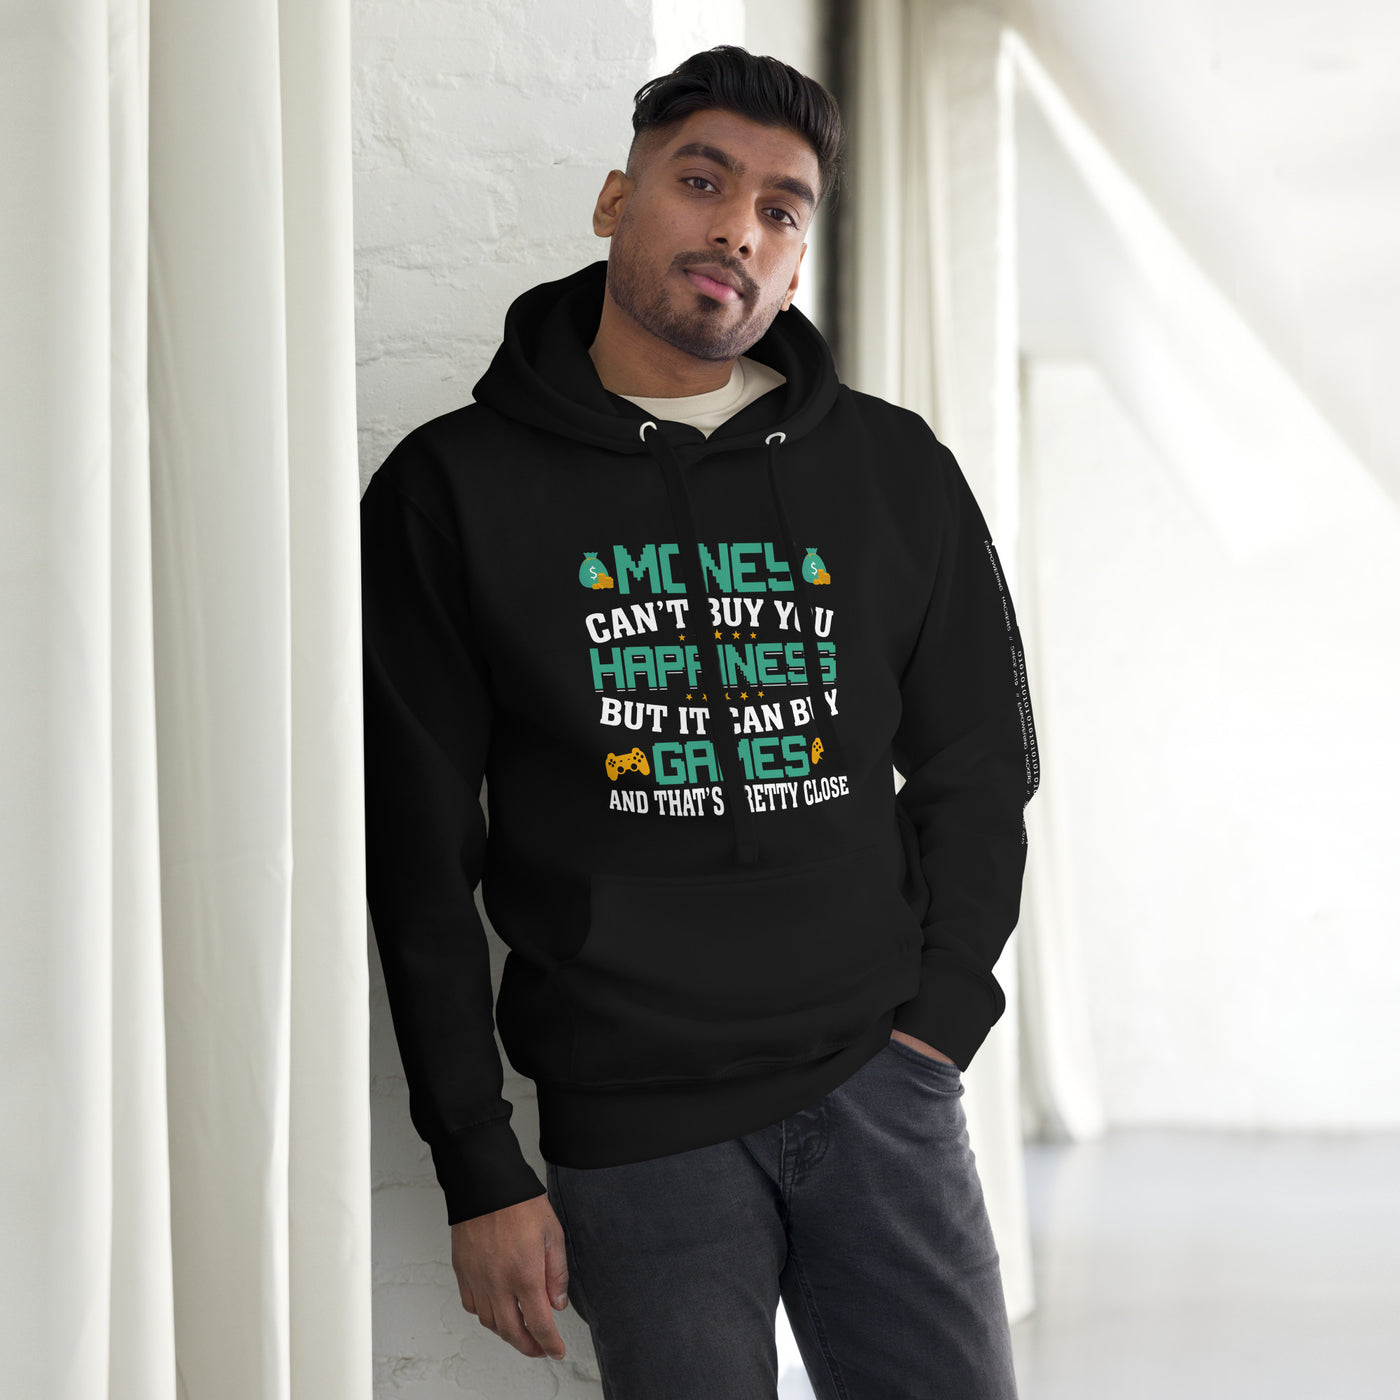 Money cannot buy you happiness, but it can buy games Unisex Hoodie